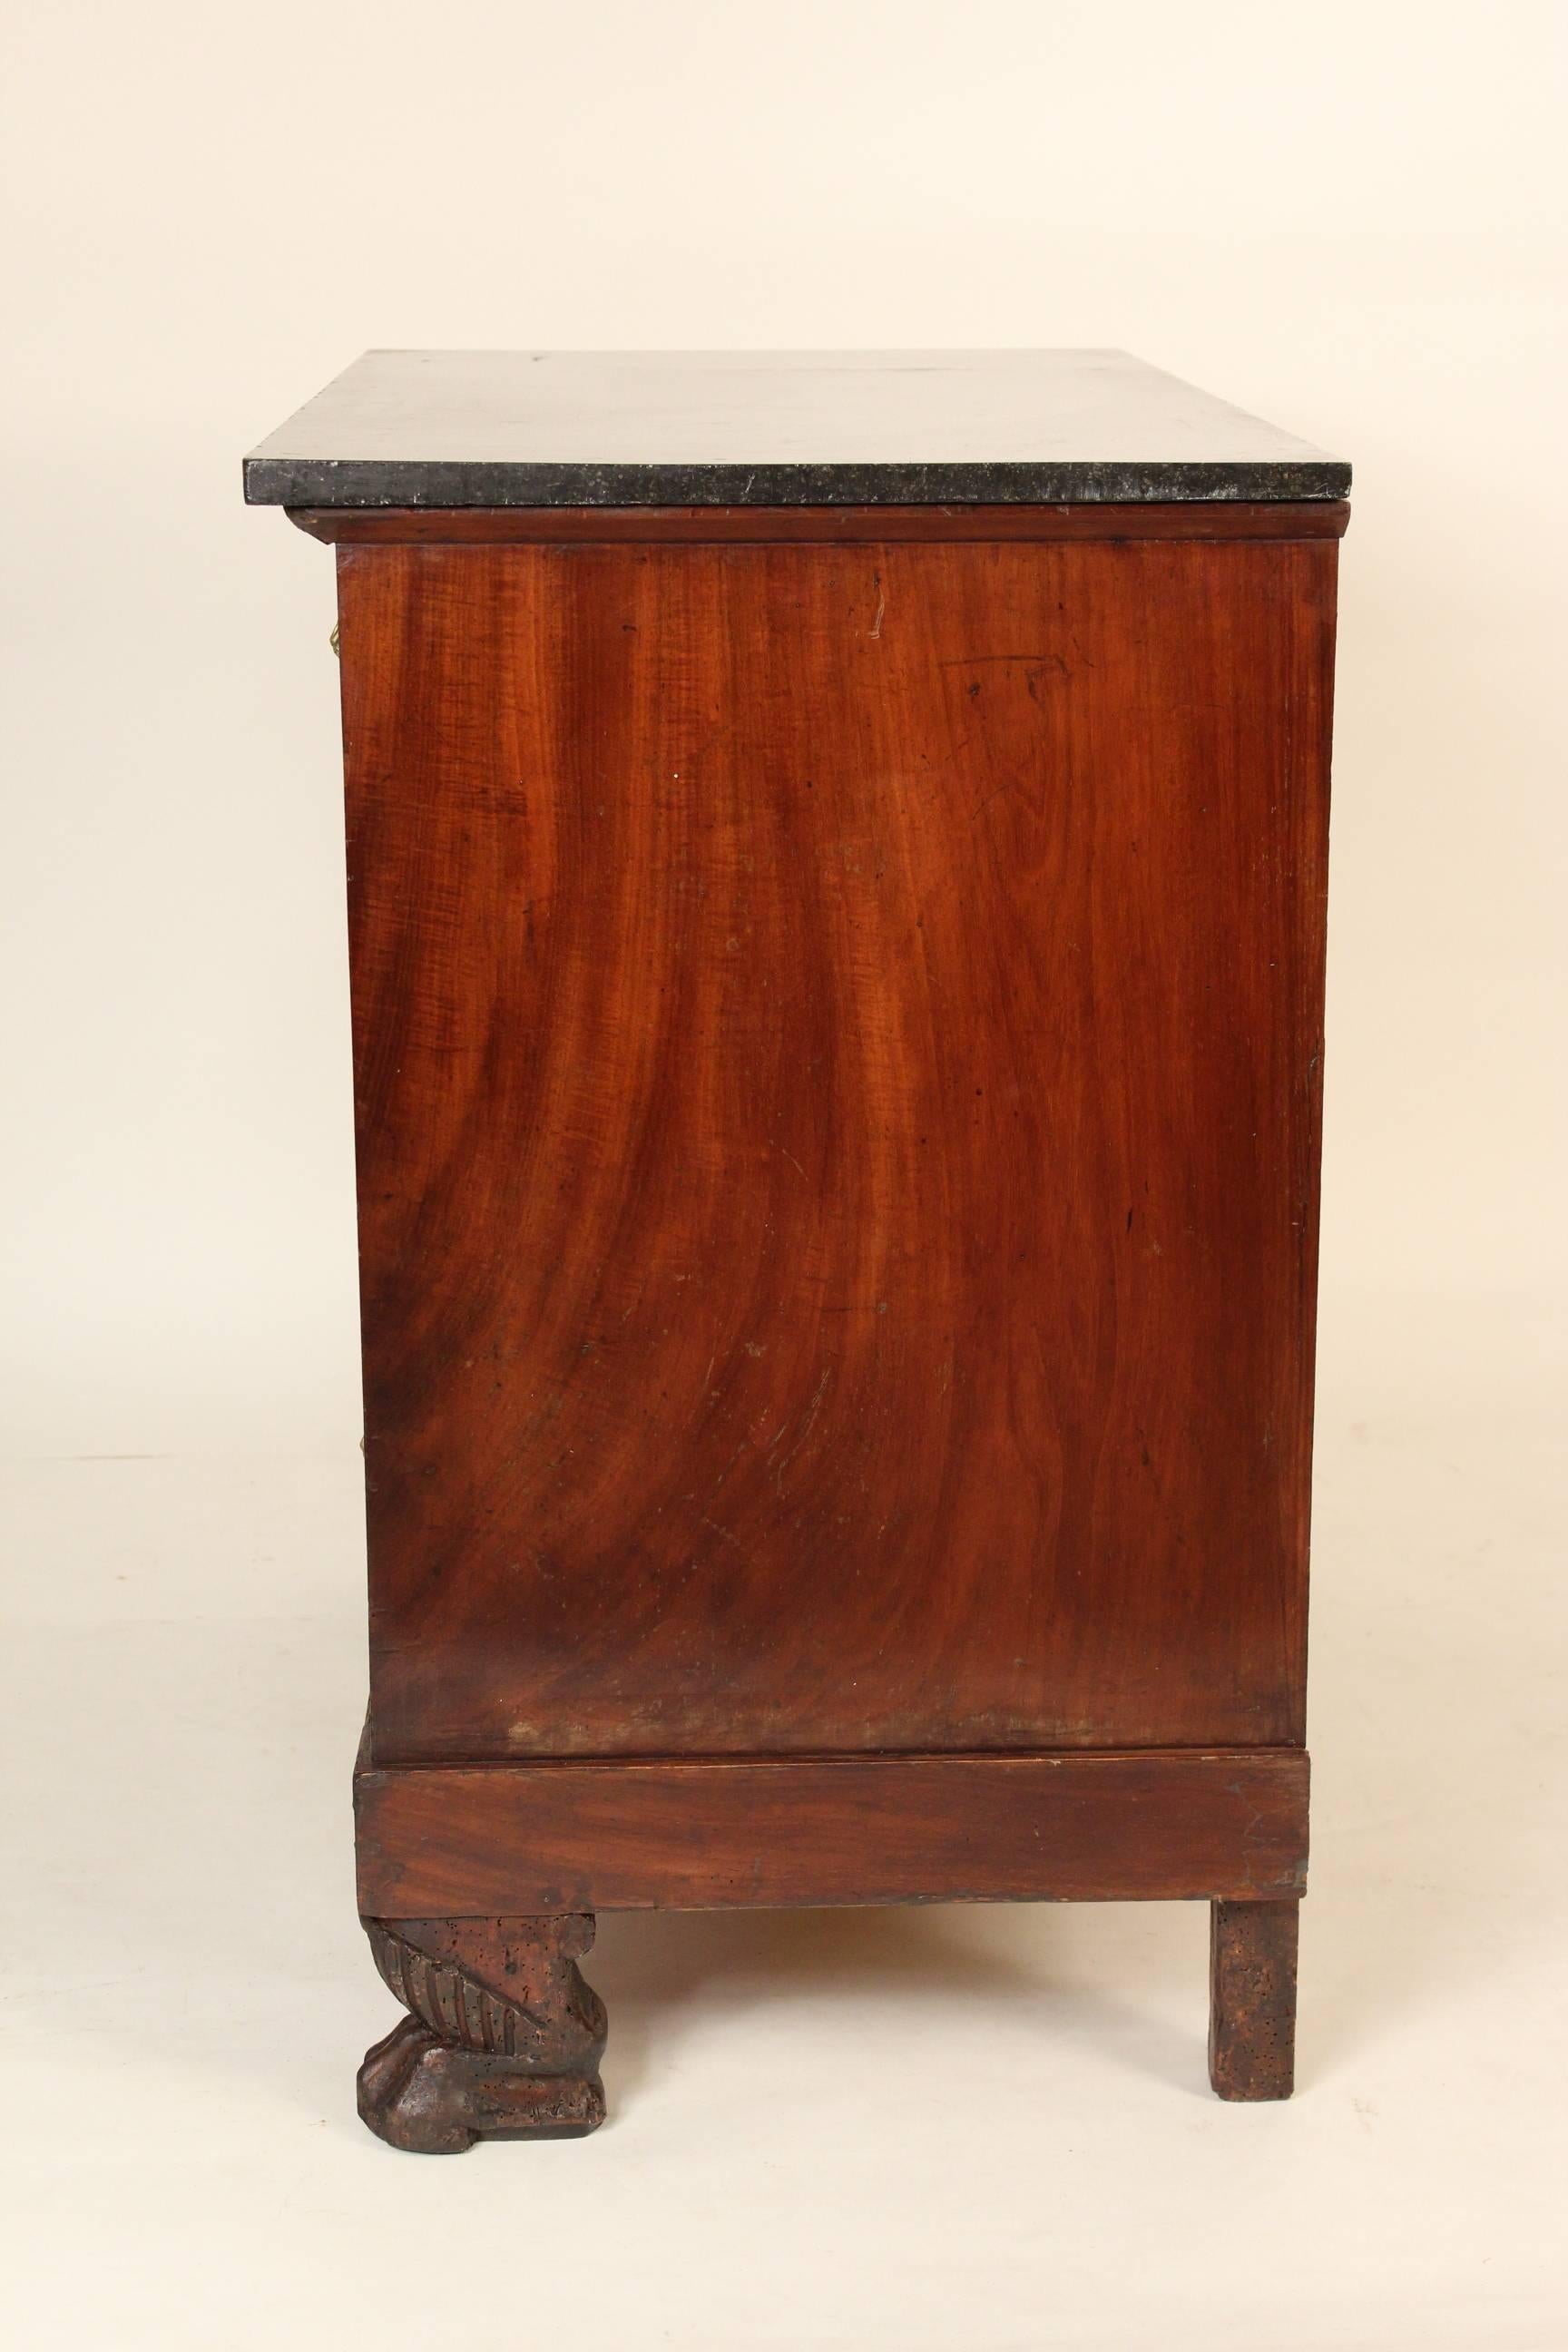 Empire mahogany commode with paw feet and a marble top, circa 1825. This chest has very nice color and the hardware is original.